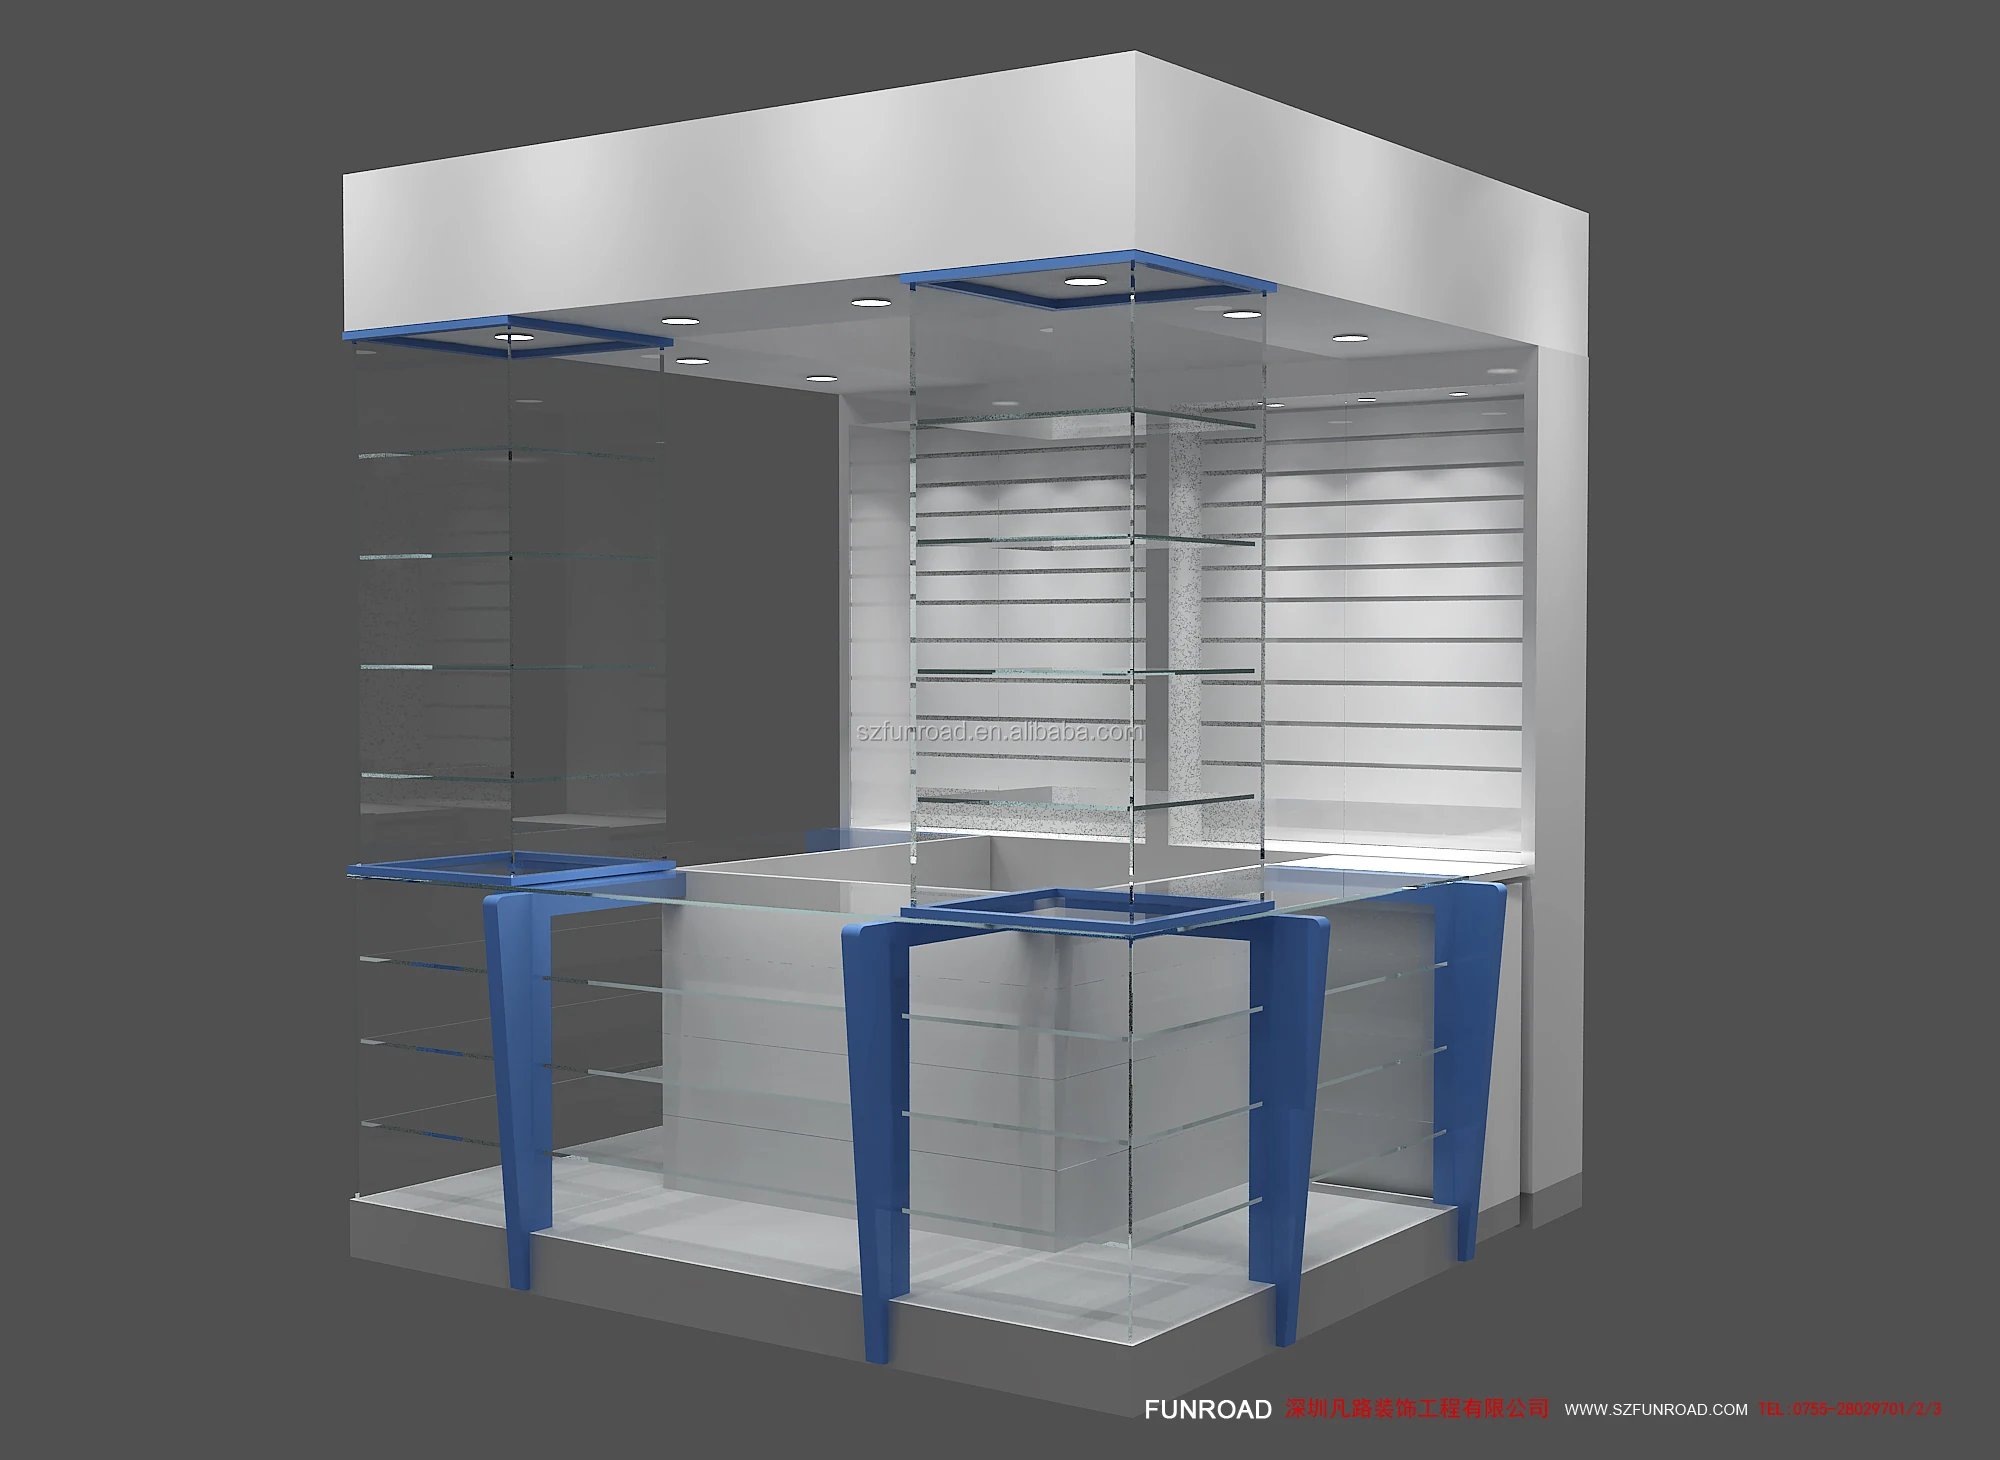 retail store display counter mall Jewelry display booth jewelry kiosk design with led light strip